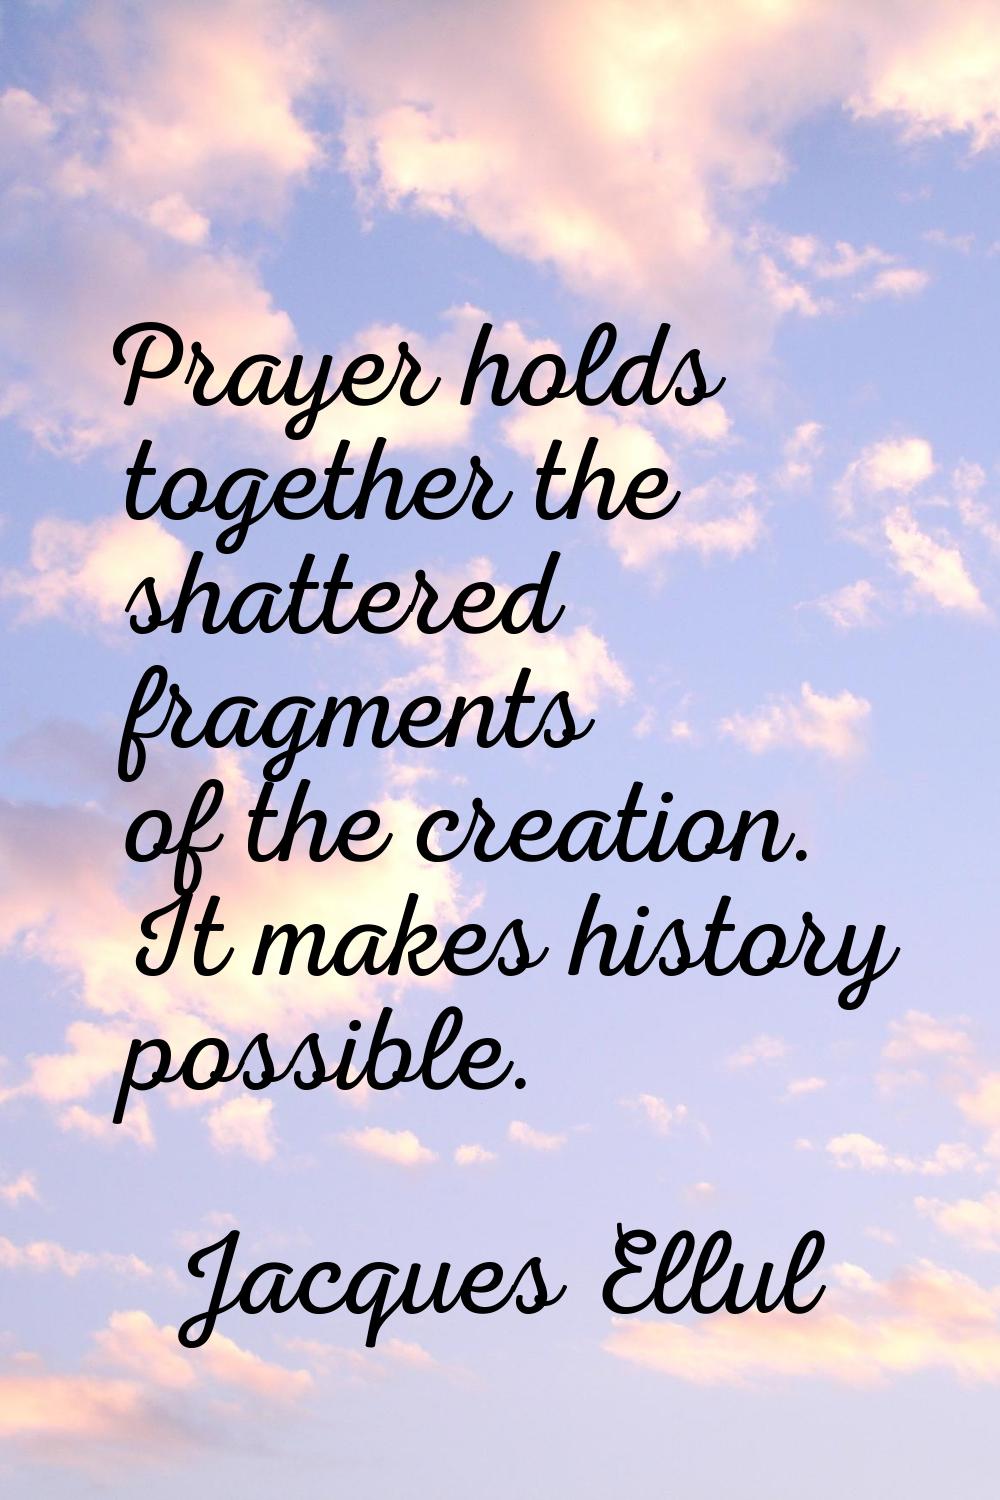 Prayer holds together the shattered fragments of the creation. It makes history possible.